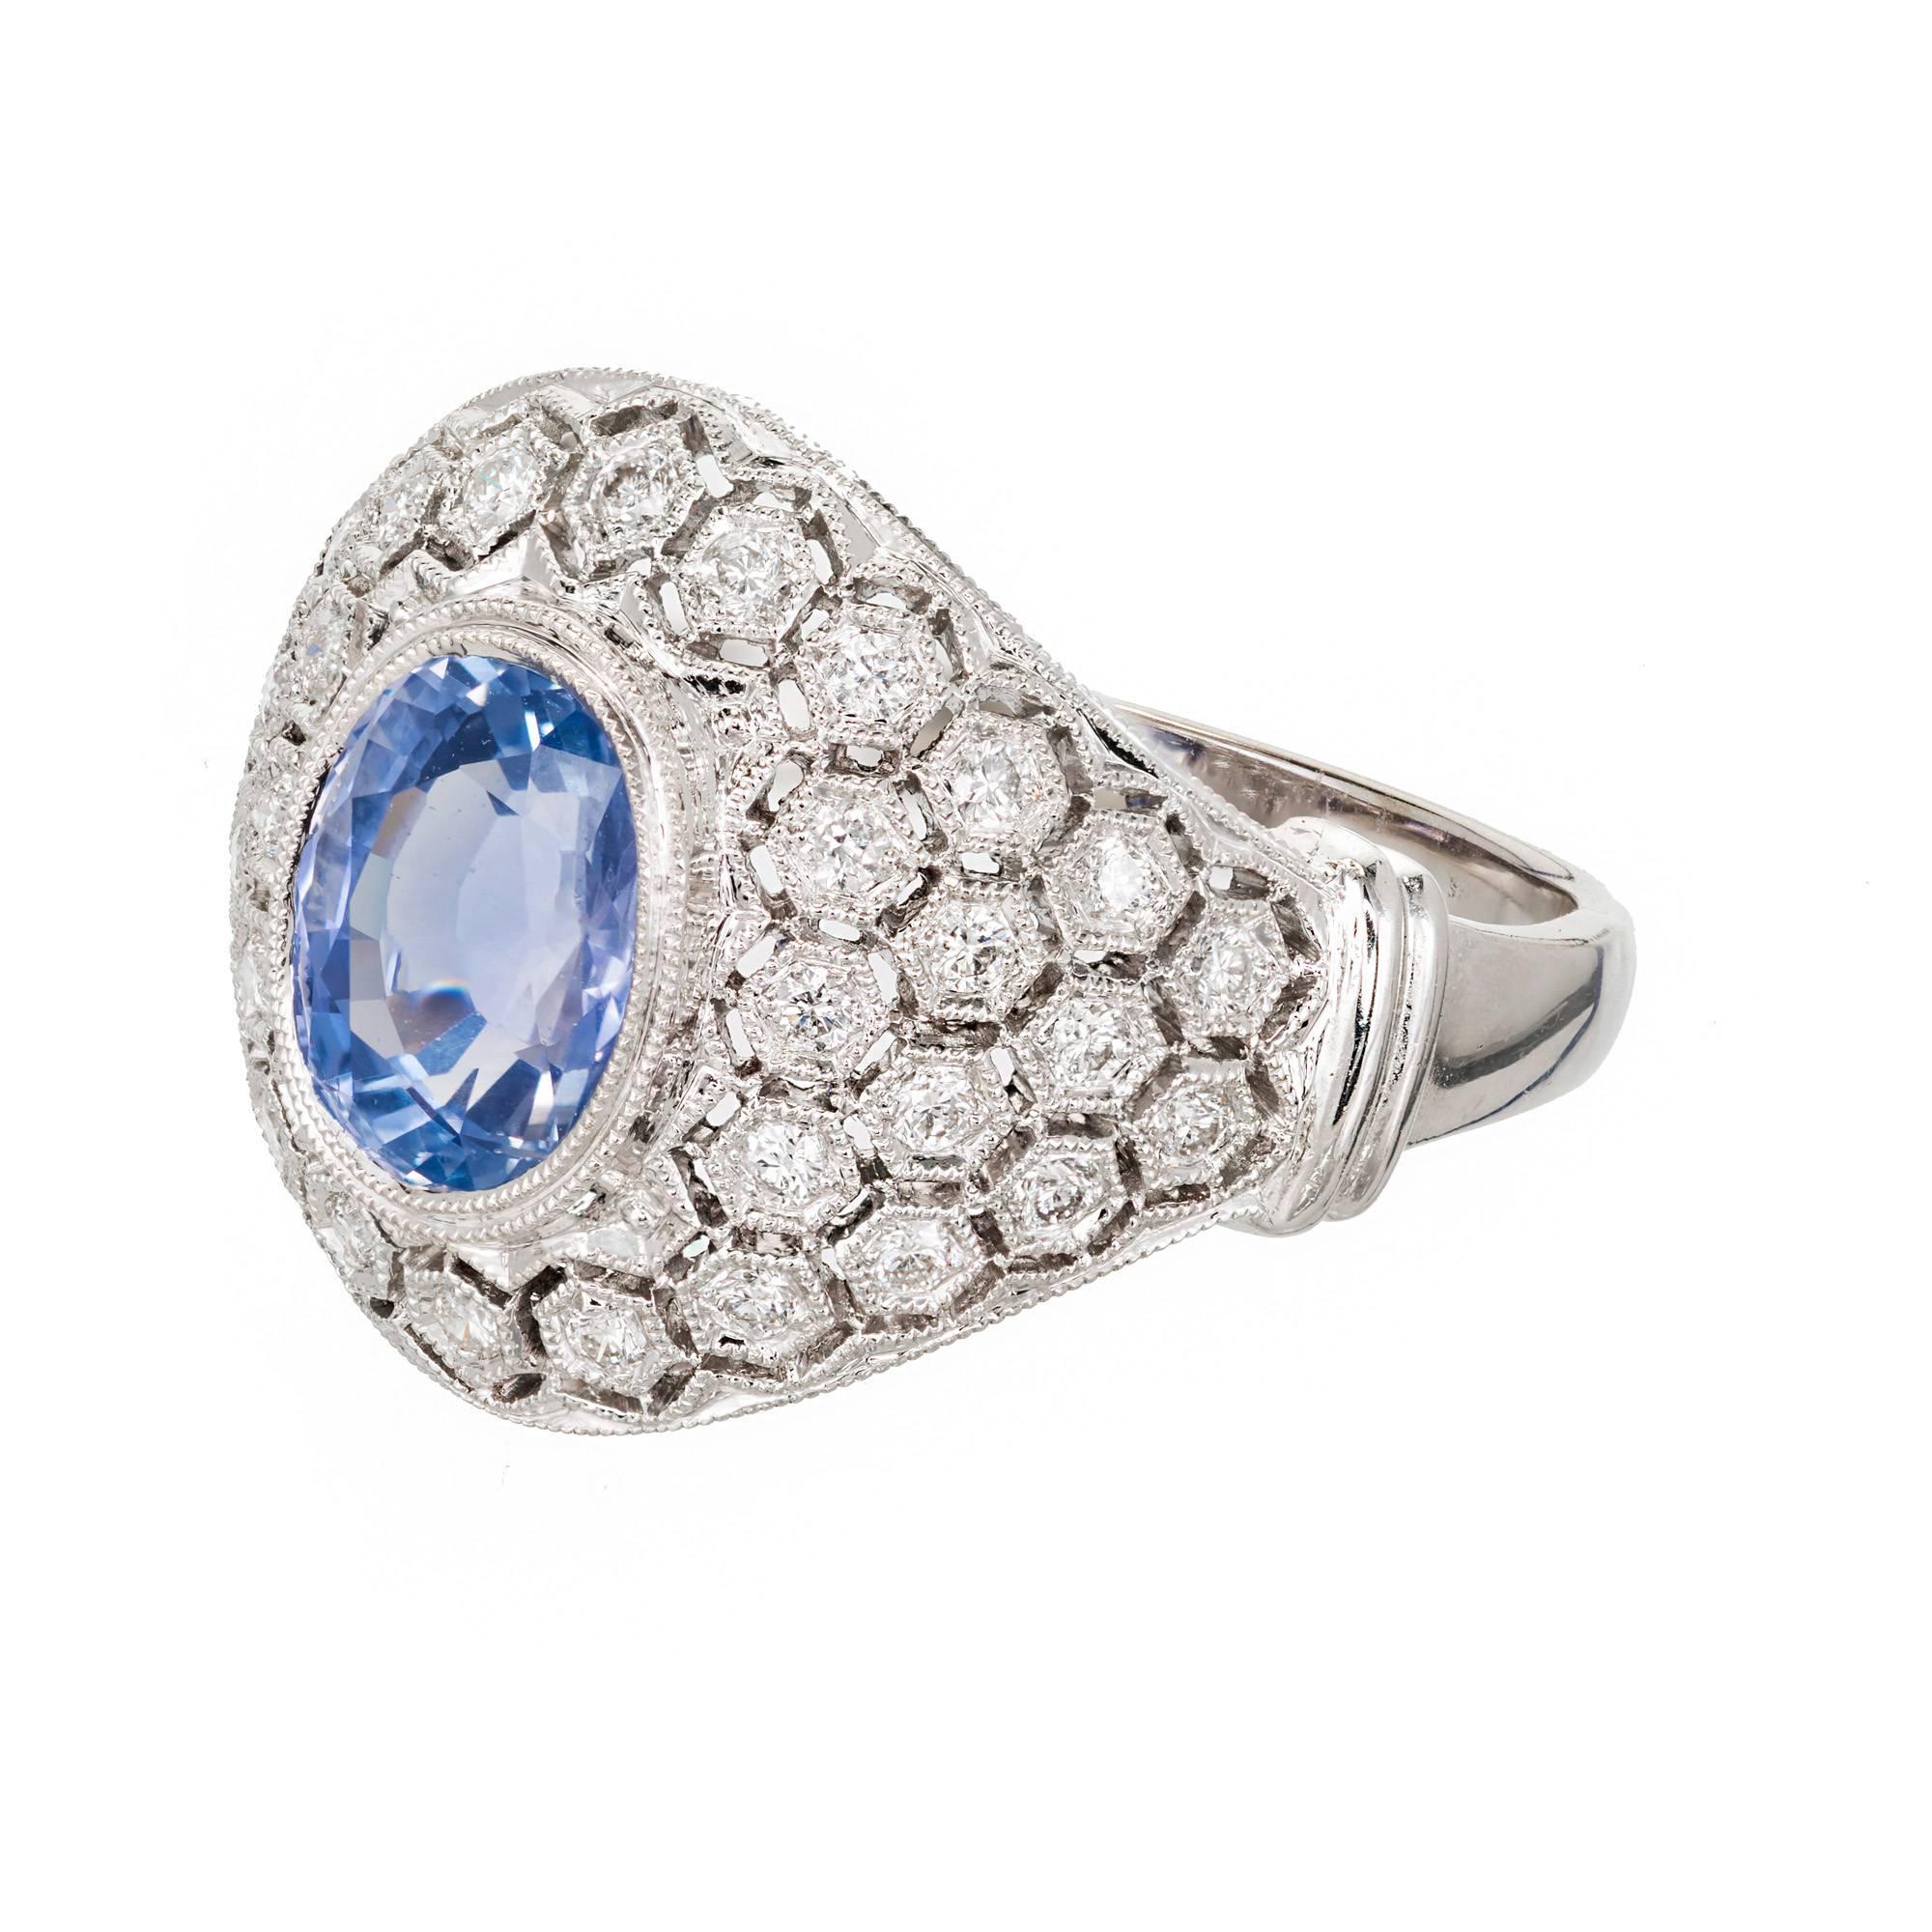 Original 1930-1940 Art Deco 18k white gold cluster cocktail ring with hand made honey comb diamond style cut outs and a natural no heat periwinkle blue Sapphire with no enhancements. GIA certified rare and special. GIA certified 

1 Oval mixed cut